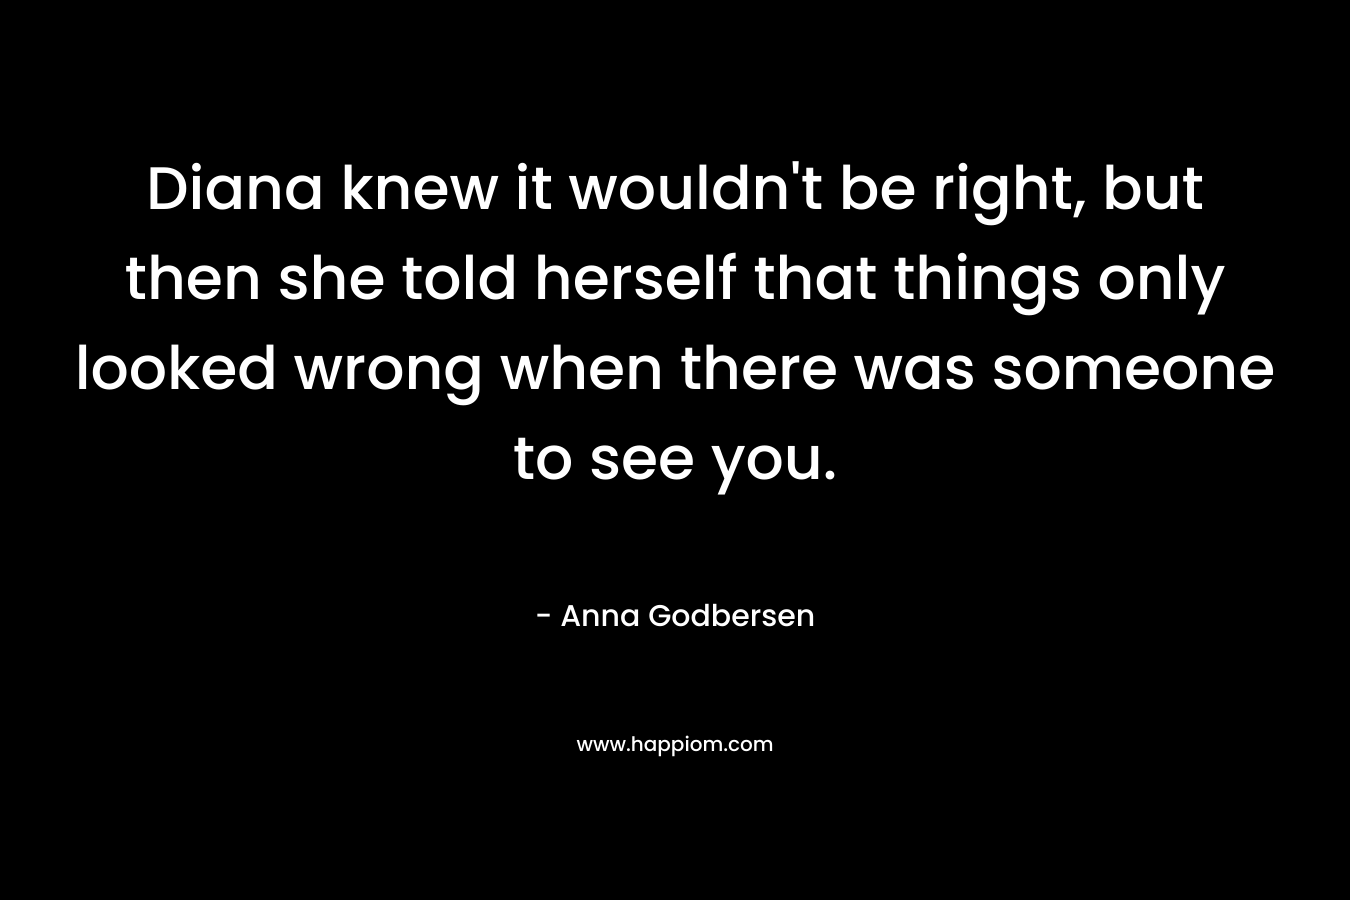 Diana knew it wouldn’t be right, but then she told herself that things only looked wrong when there was someone to see you. – Anna Godbersen